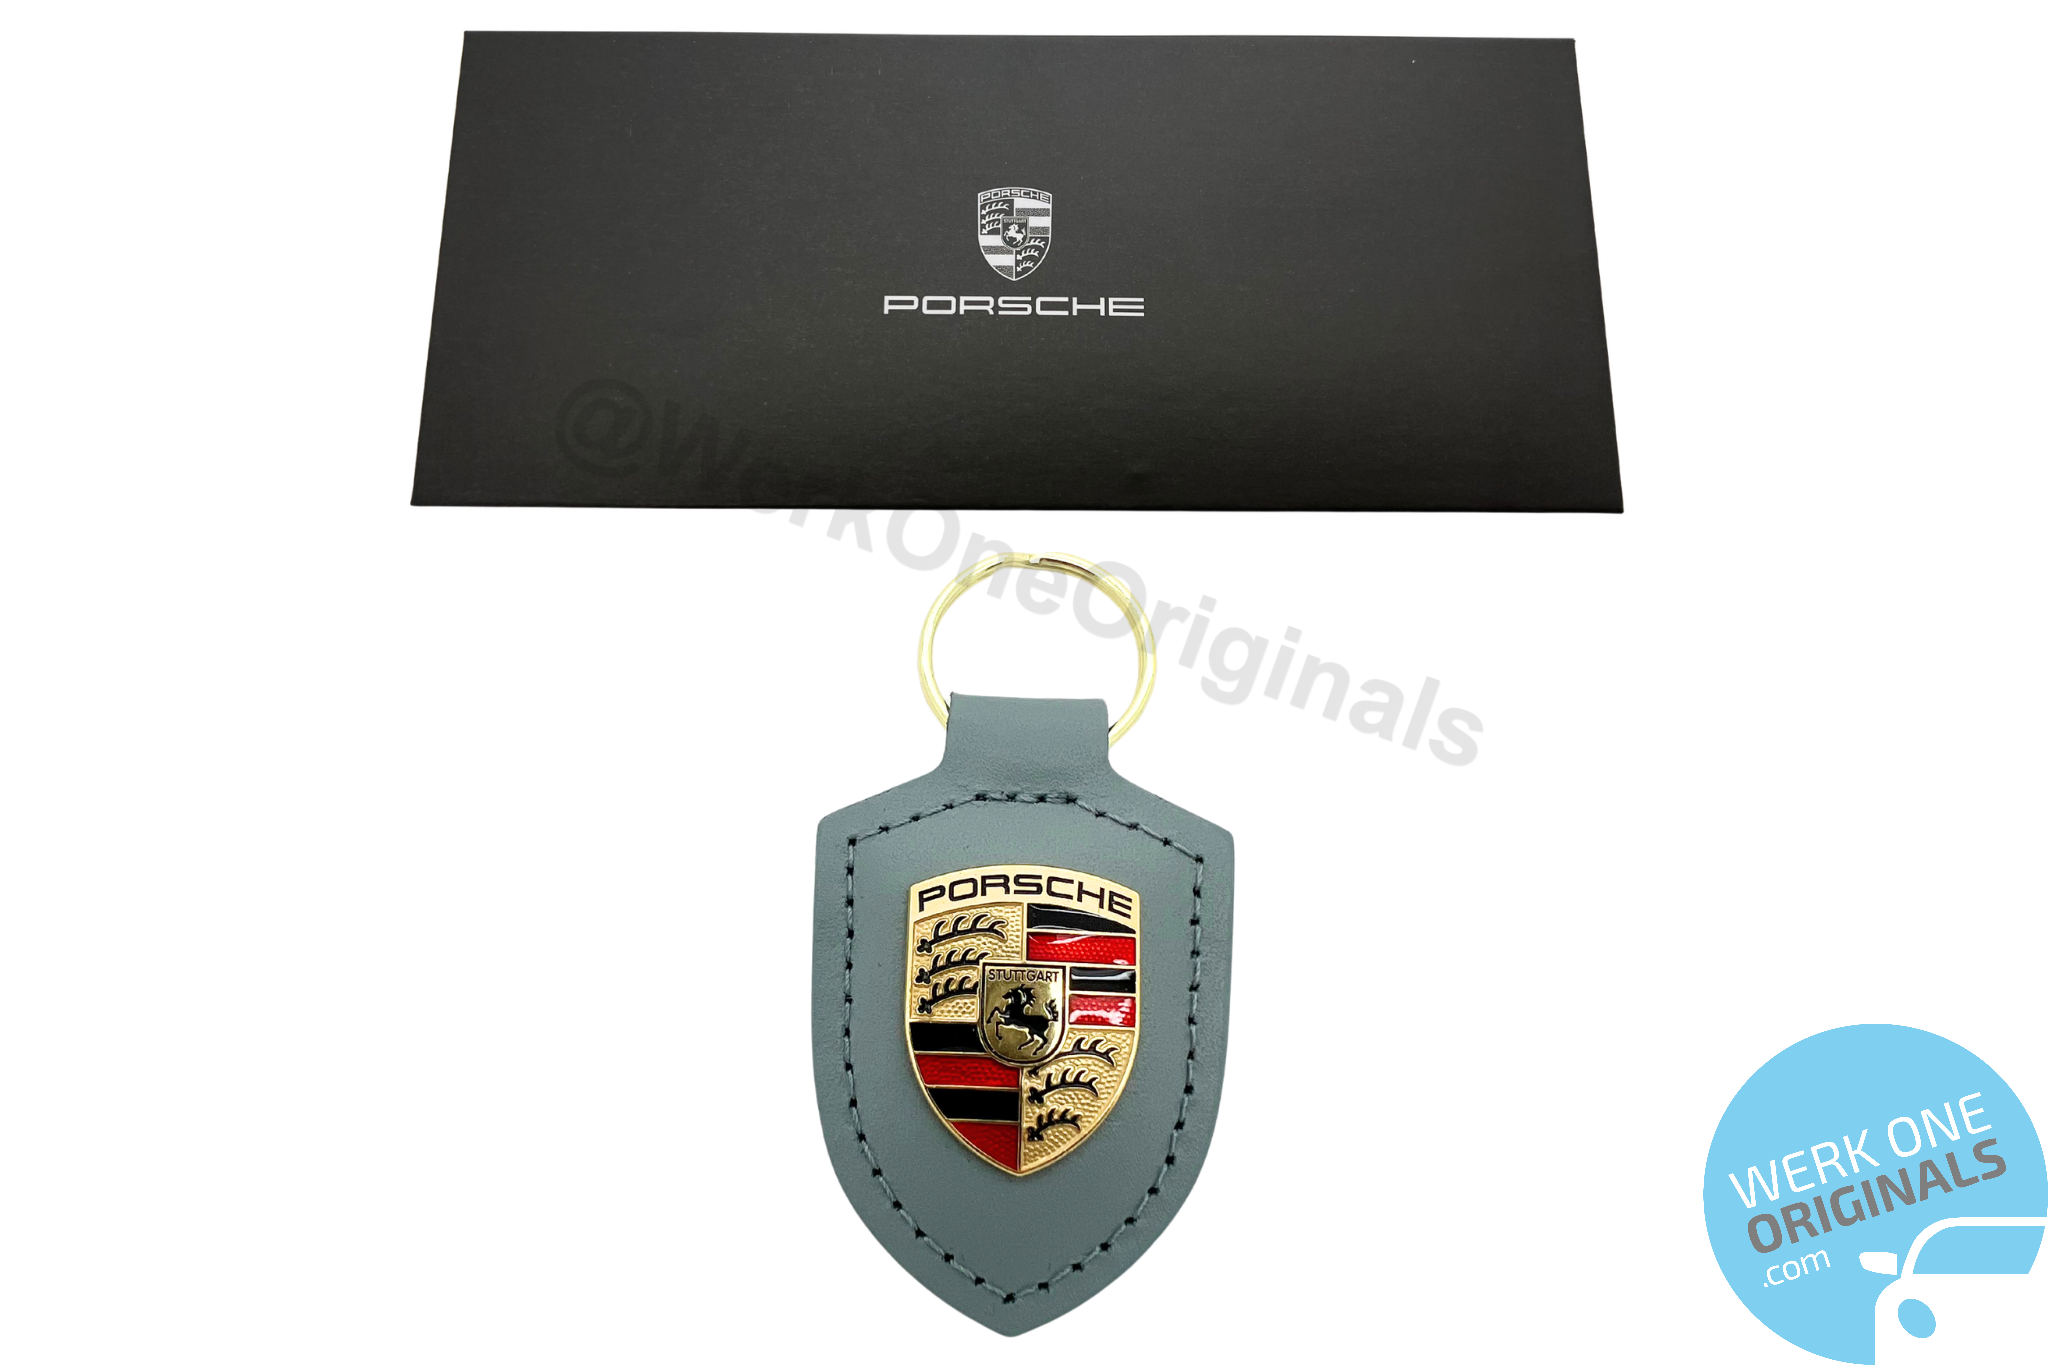 Porsche Official Crest Leather Key Fob in Shade Green